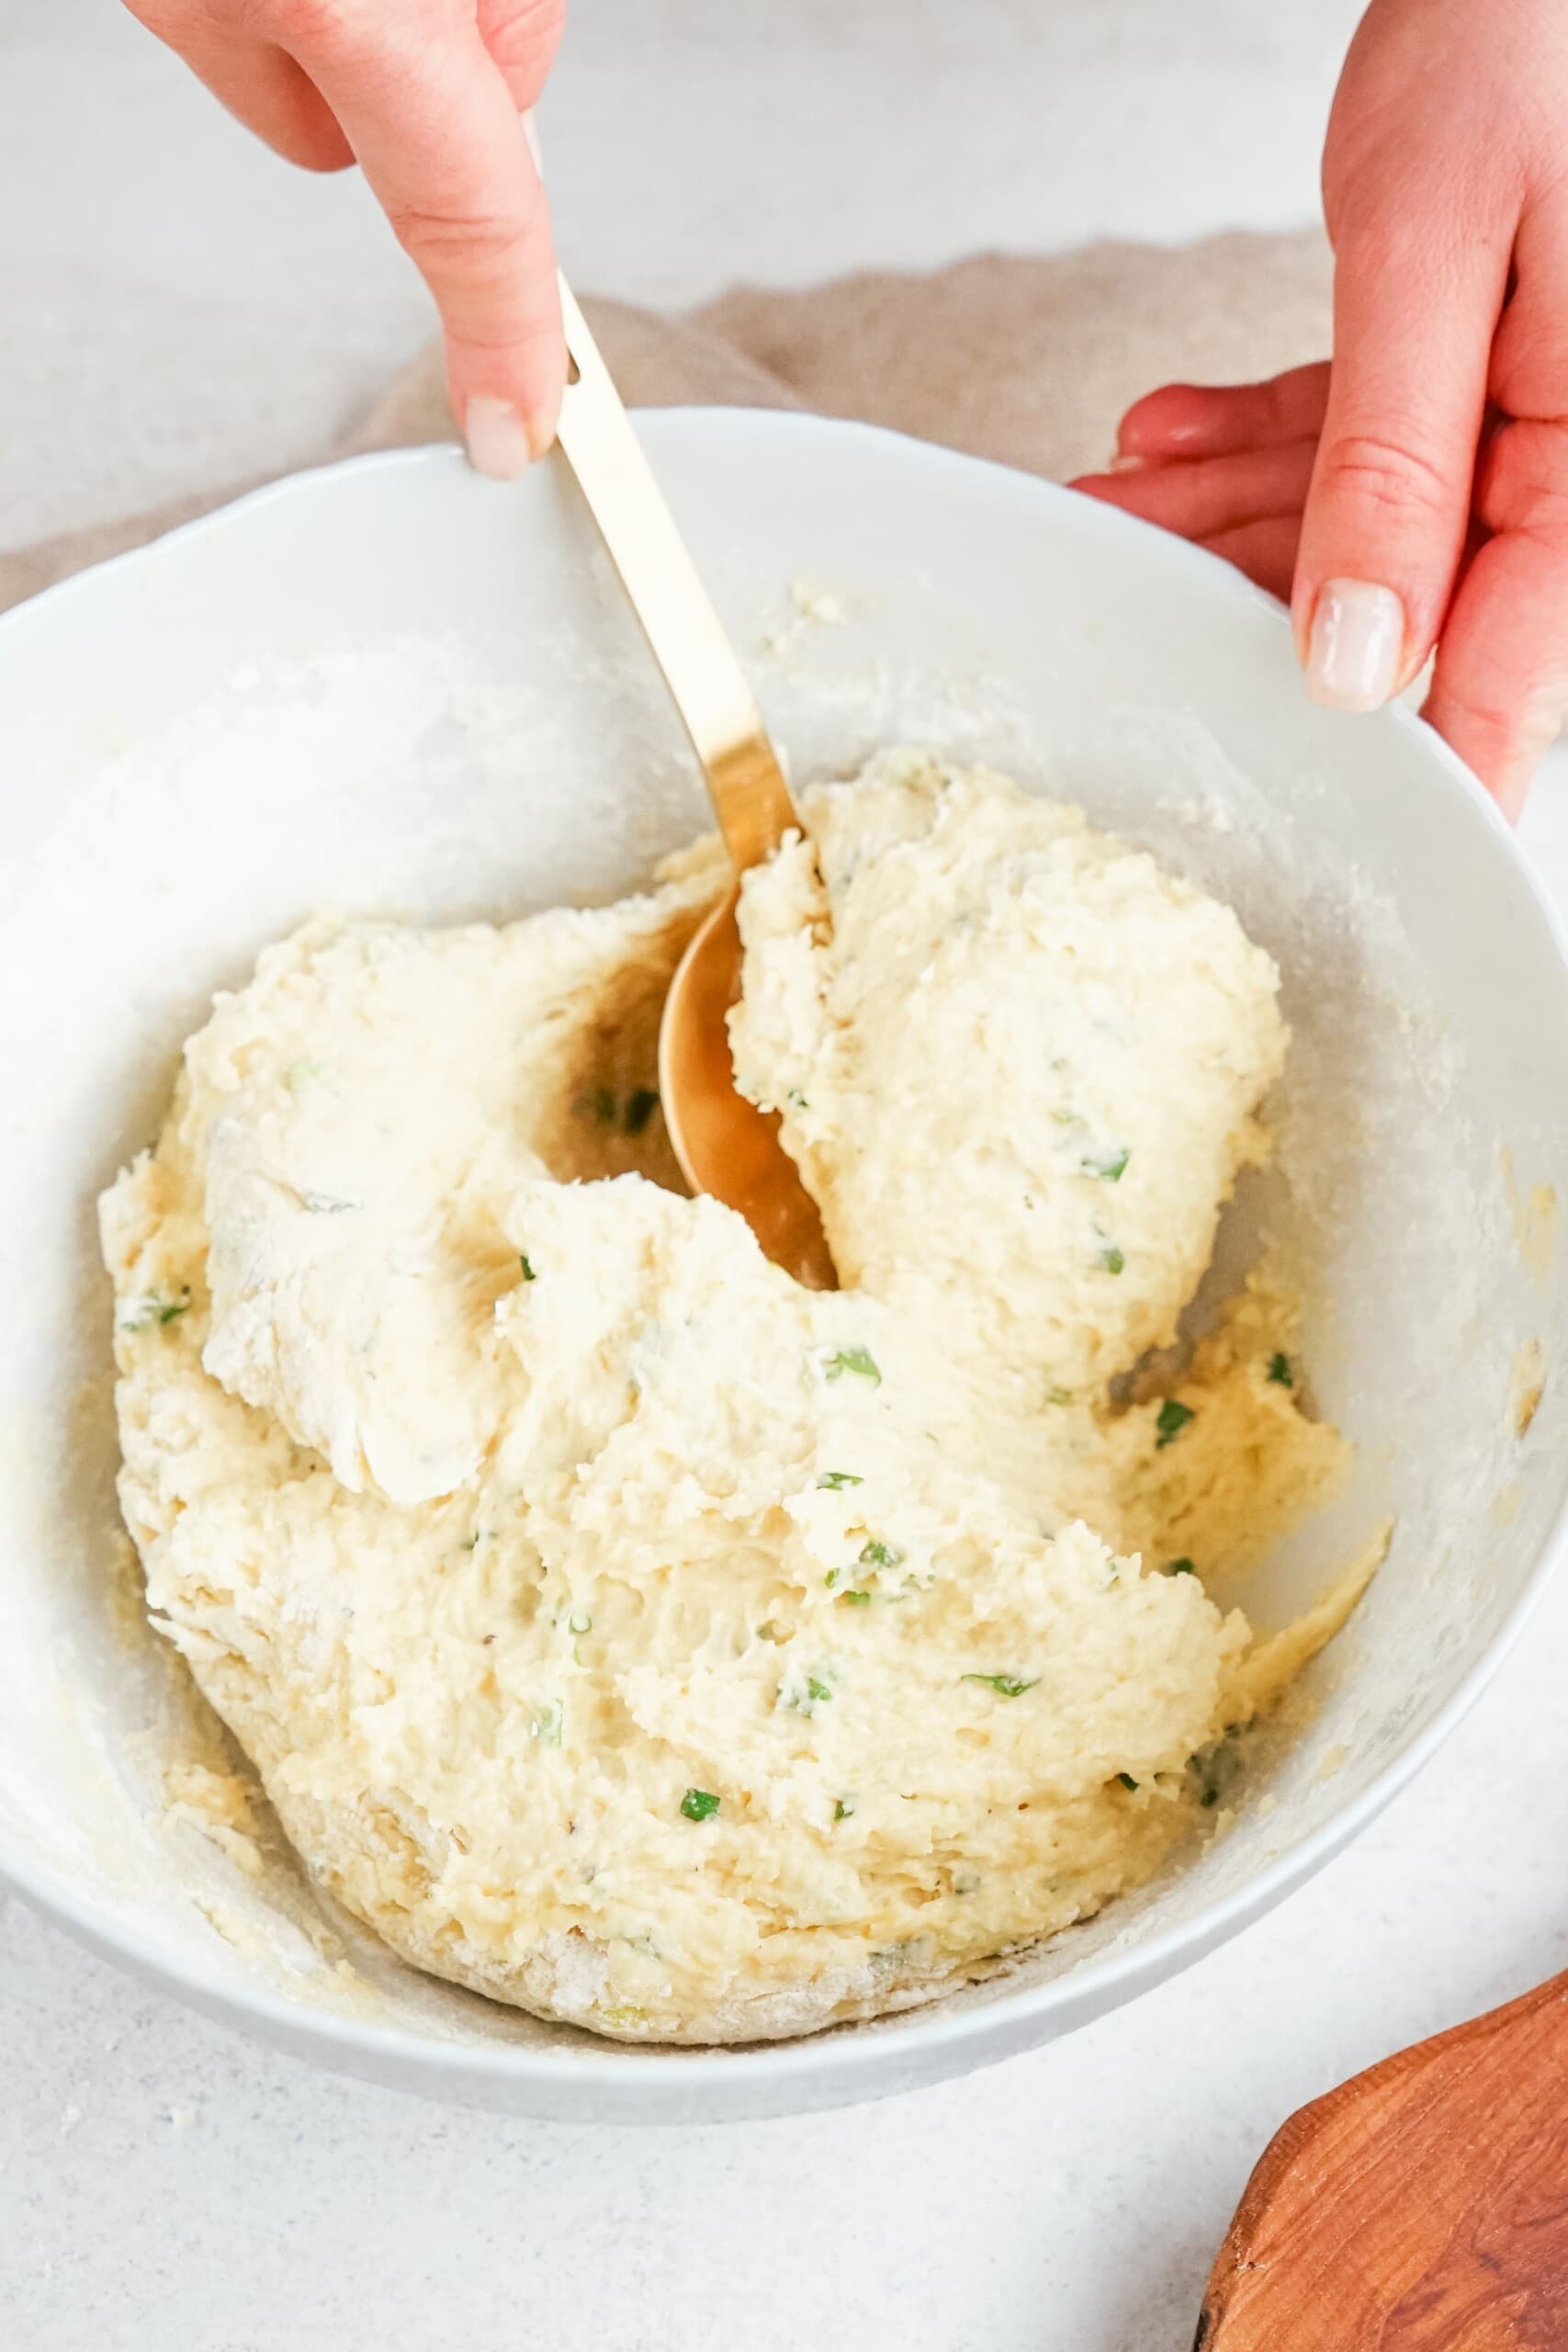 large spoon scooping mashed potatoes